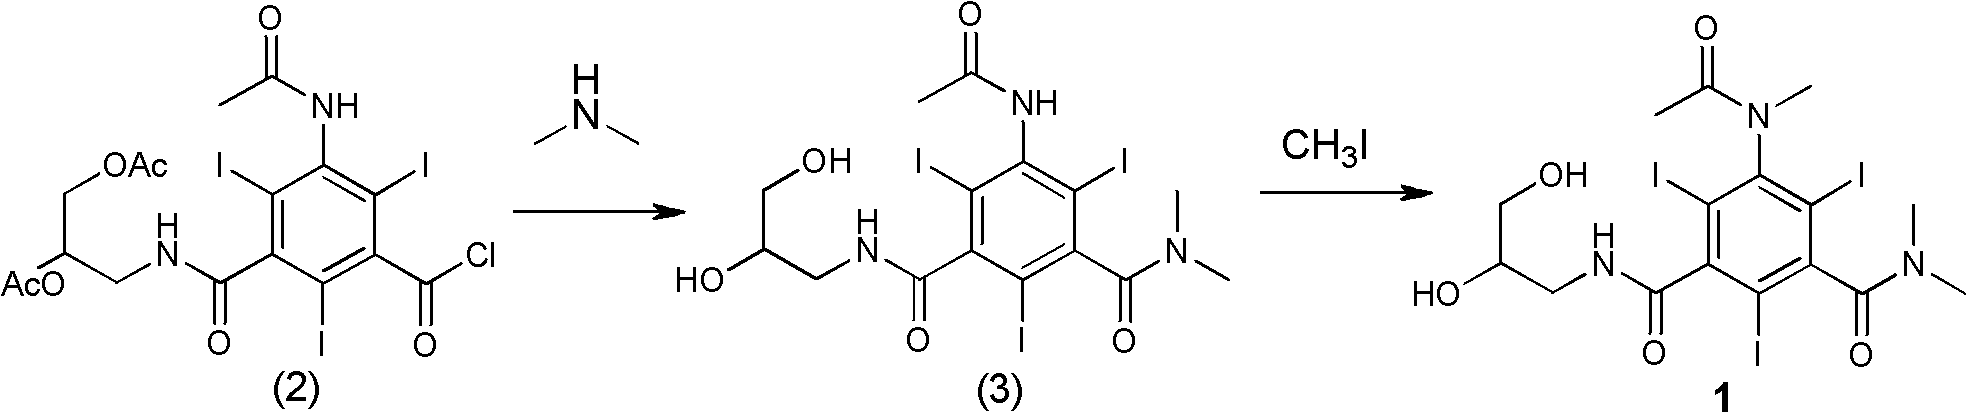 Low-osmotic-pressure triiodo-benzene compound contrast agent